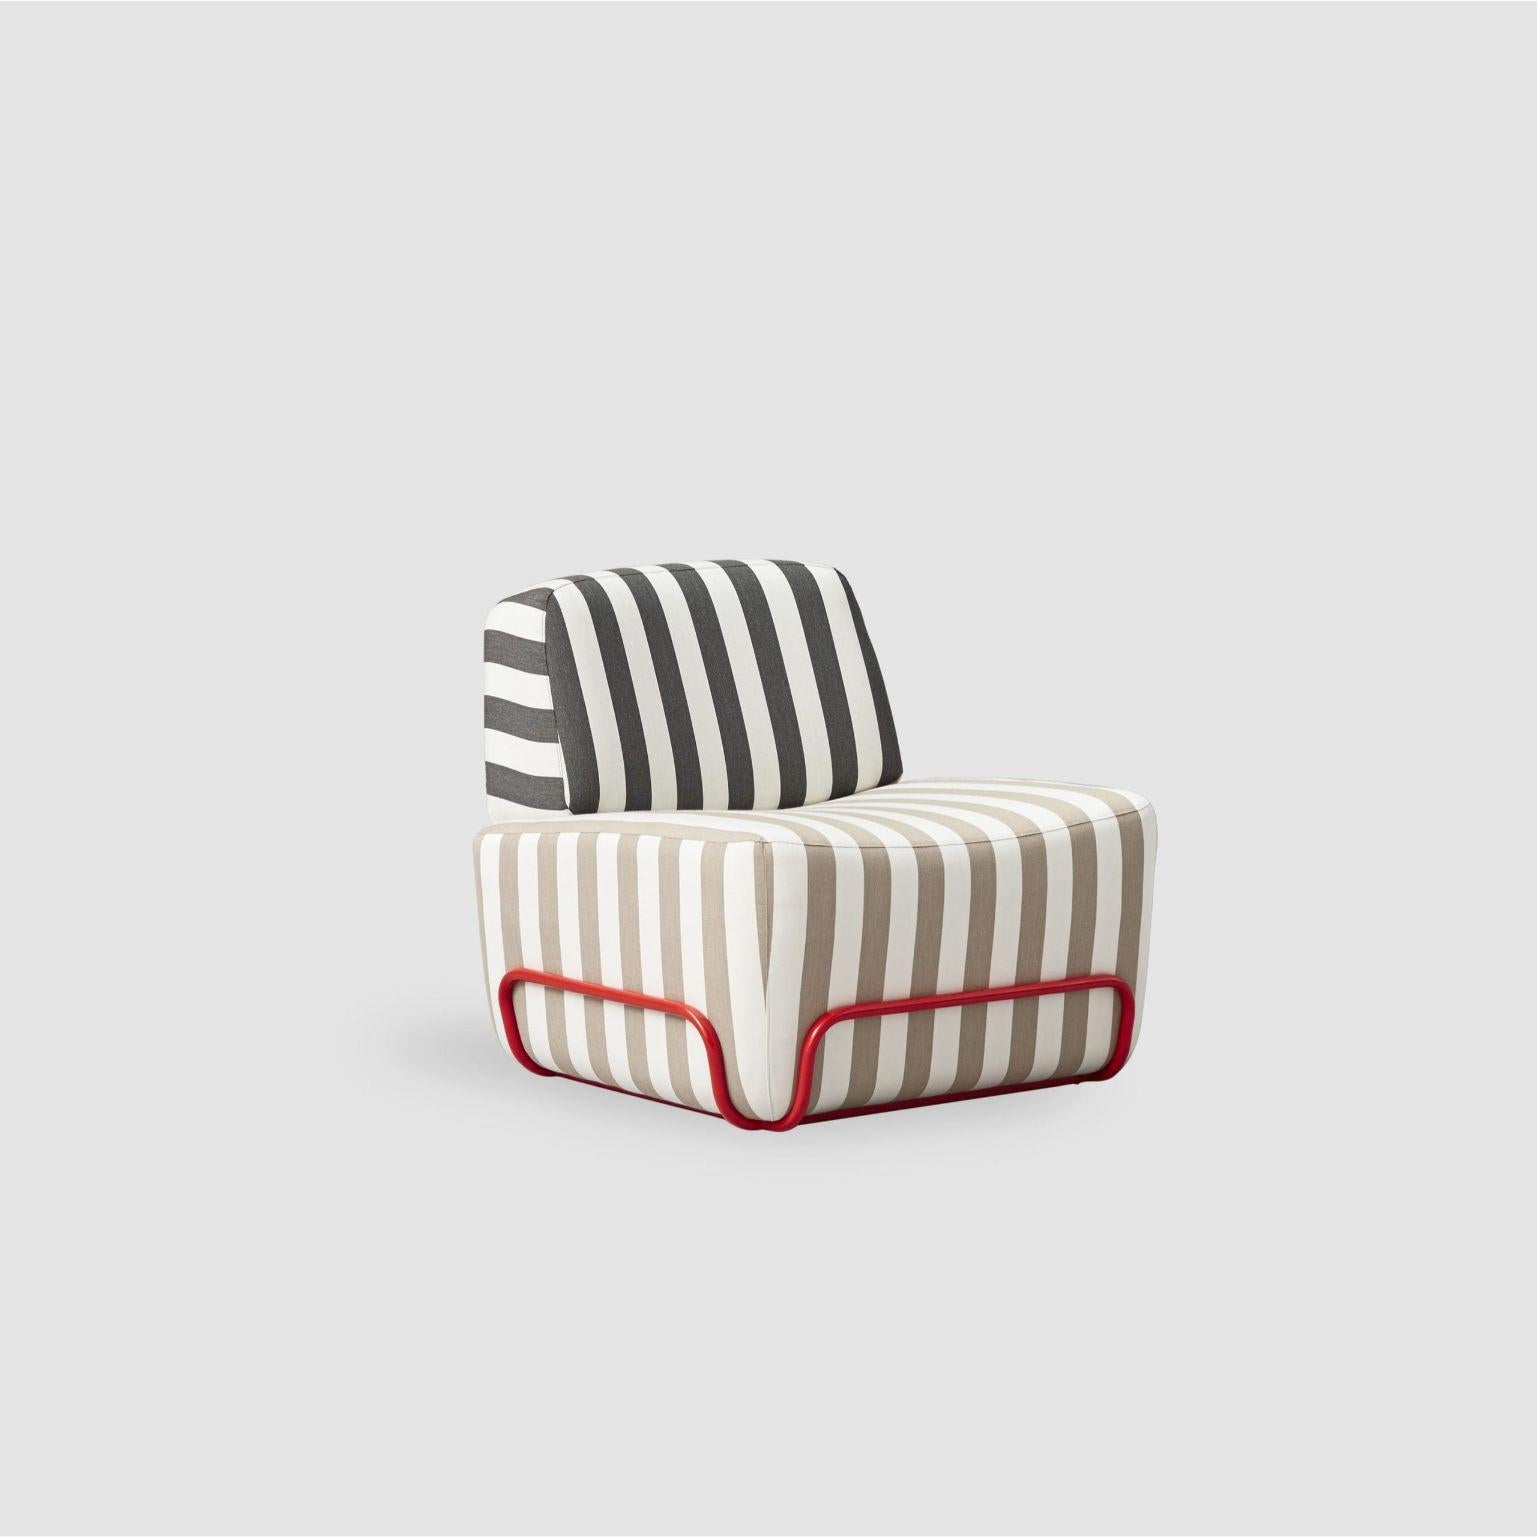 Pigro armchair by Pepe Albargues
Dimensions: W83, D90, H77, Seat 42.
Materials: Pine wood structure, tablex and particles board.
Foam CMHR (high resilience and flame retardant) for all our cushion filling systems.
Painted iron structure